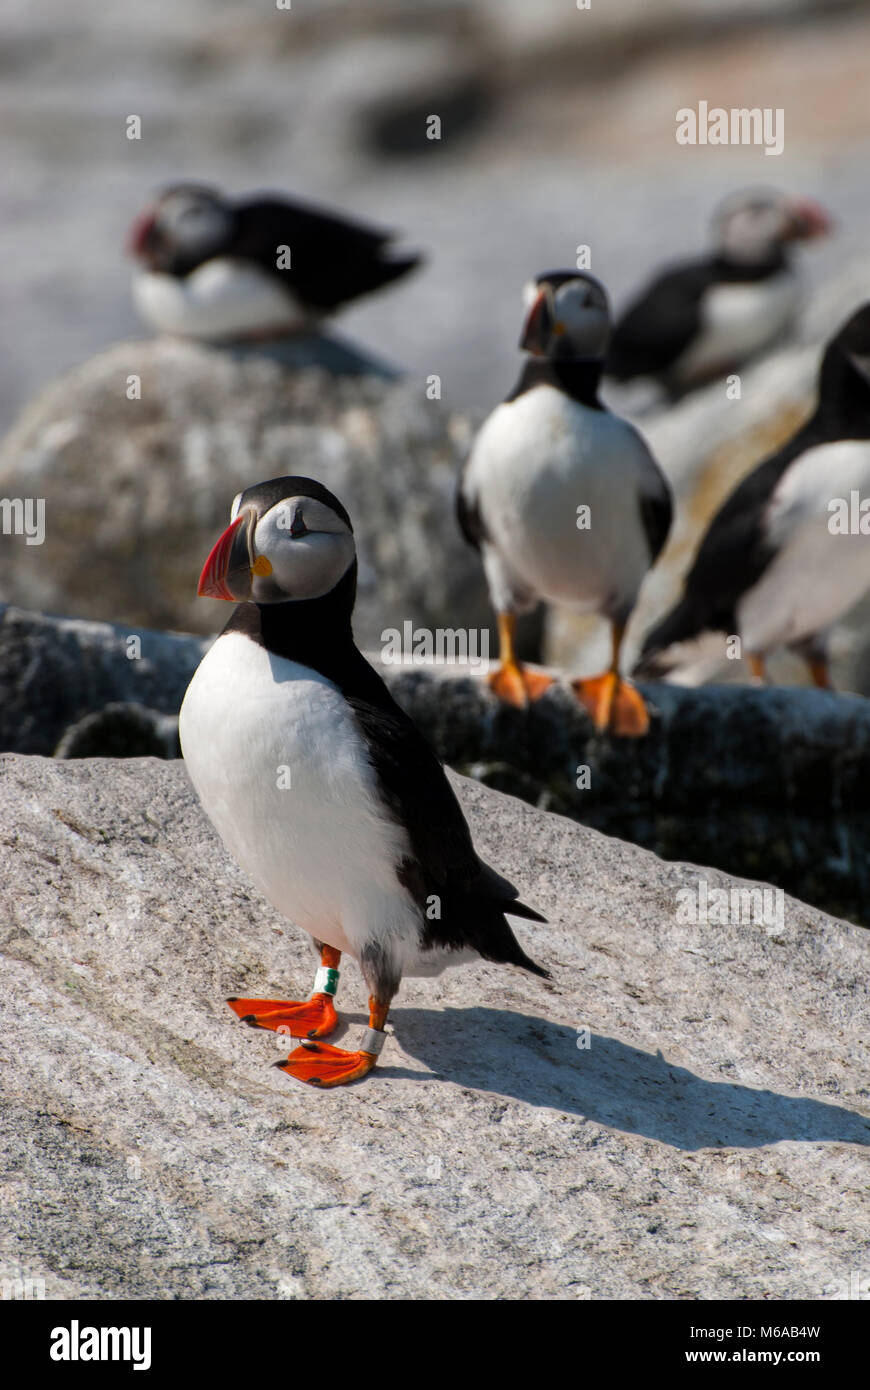 Atlantic puffin guarding territory from neighboring puffins on Maine island in New England. Stock Photo